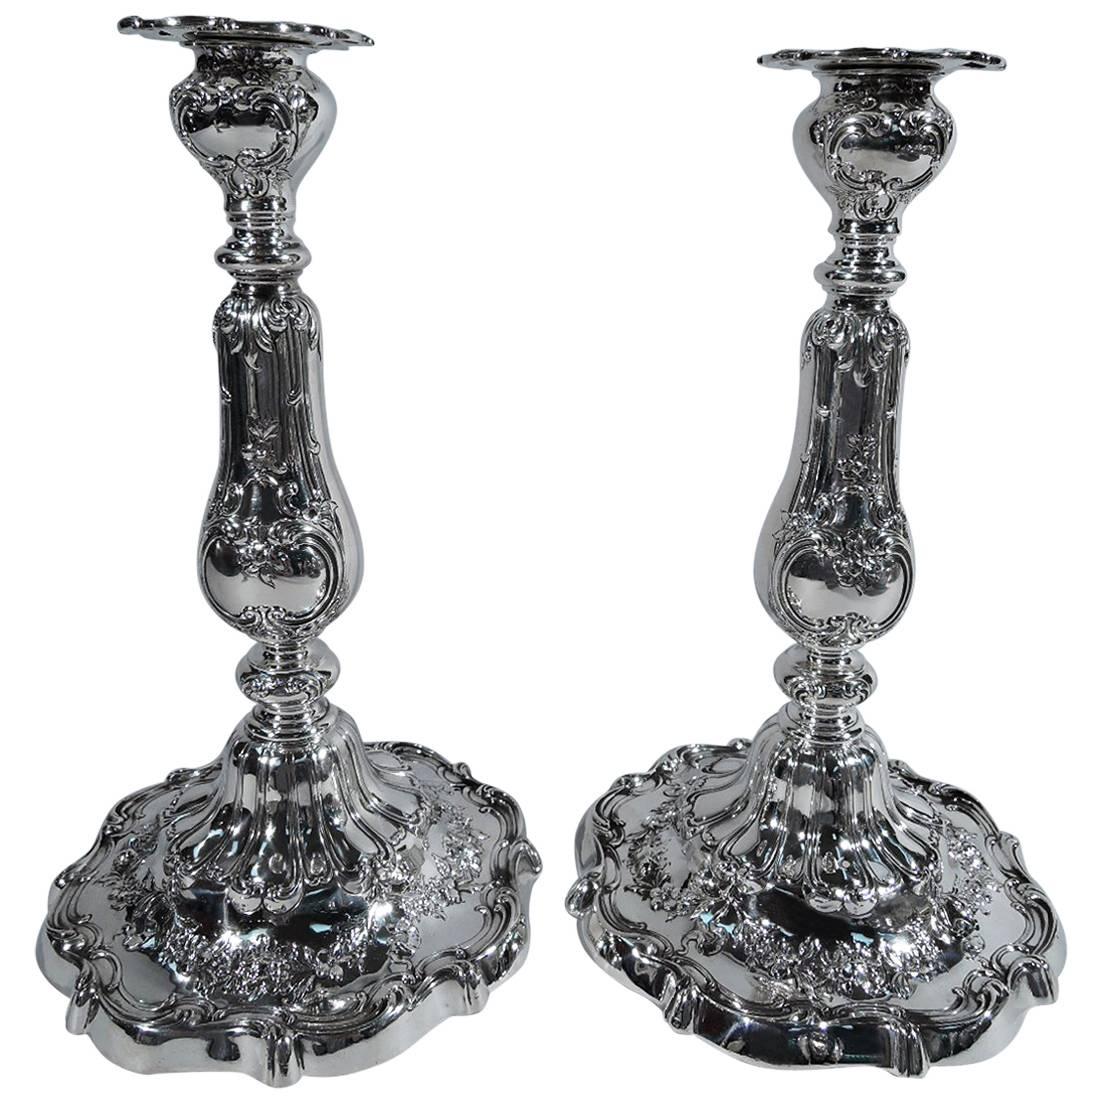 Pair of Fancy Edwardian Sterling Silver Candlesticks by Gorham